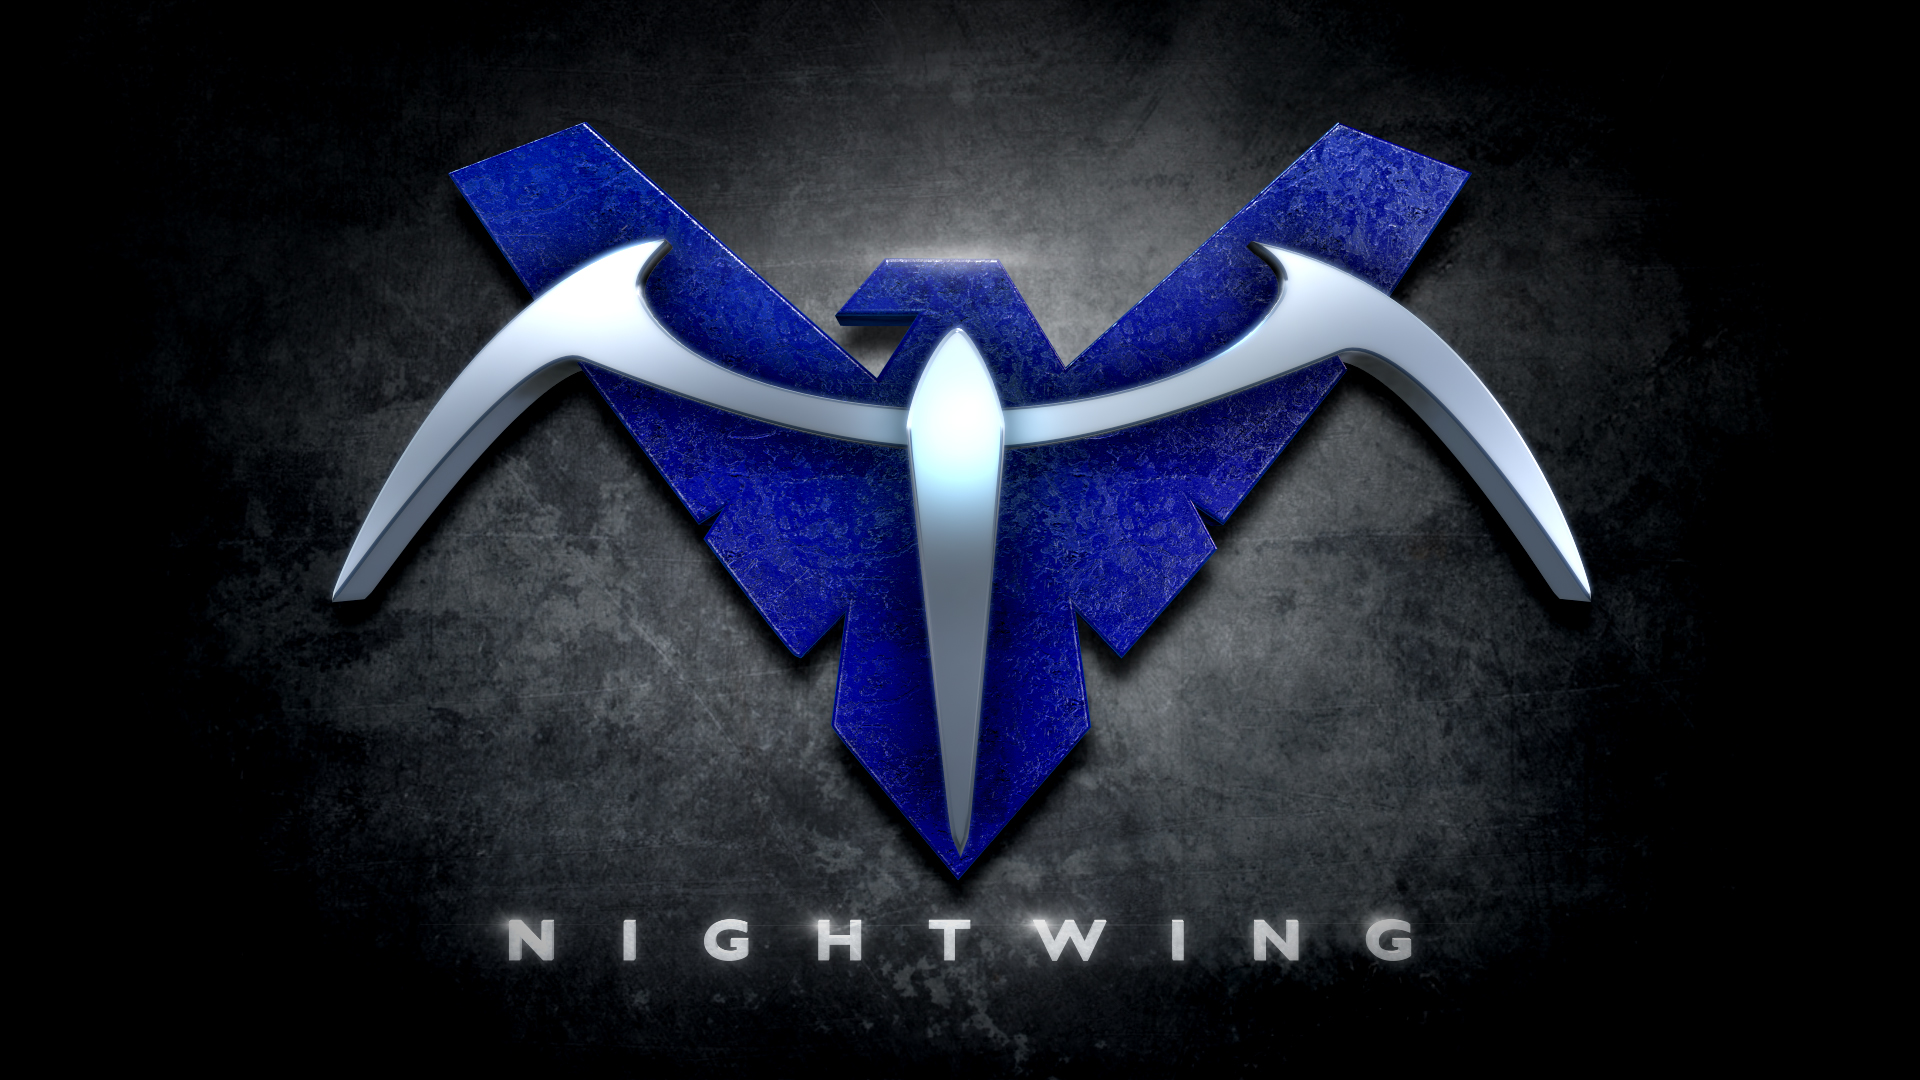 Nightwing Backgrounds Free Download